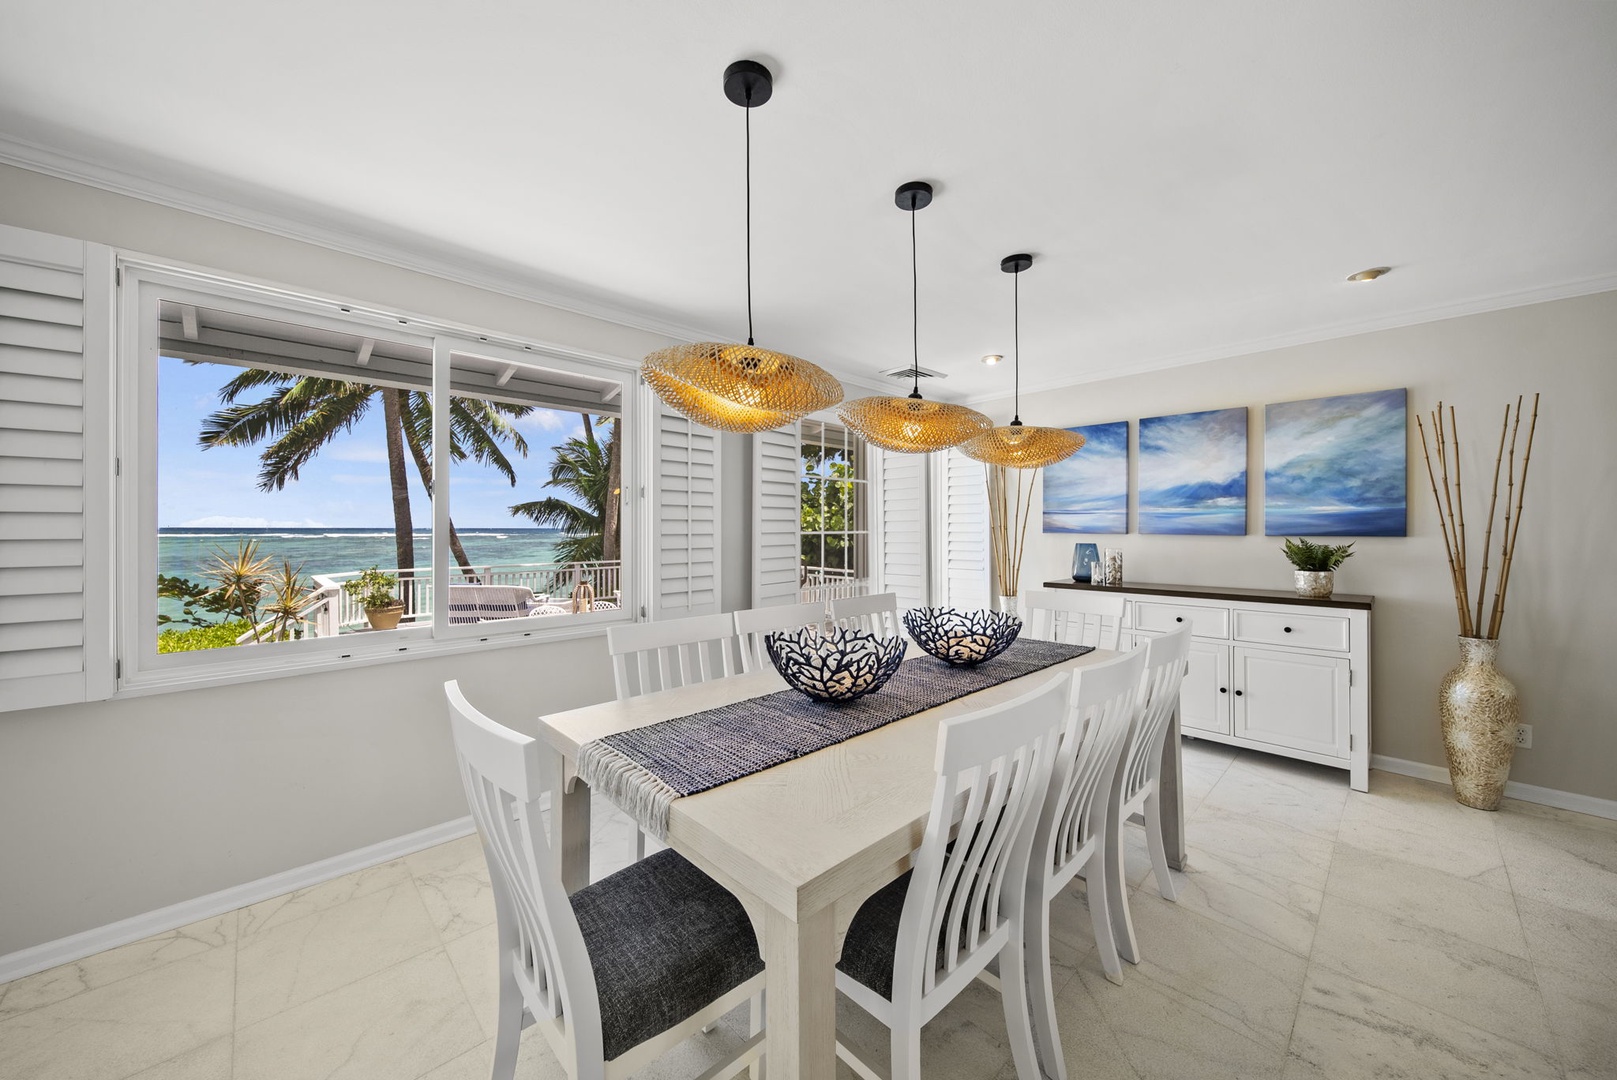 Waimanalo Vacation Rentals, Mana Kai at Waimanalo - Dine amidst panoramic vistas, where every meal becomes an unforgettable experience enveloped in natural beauty.